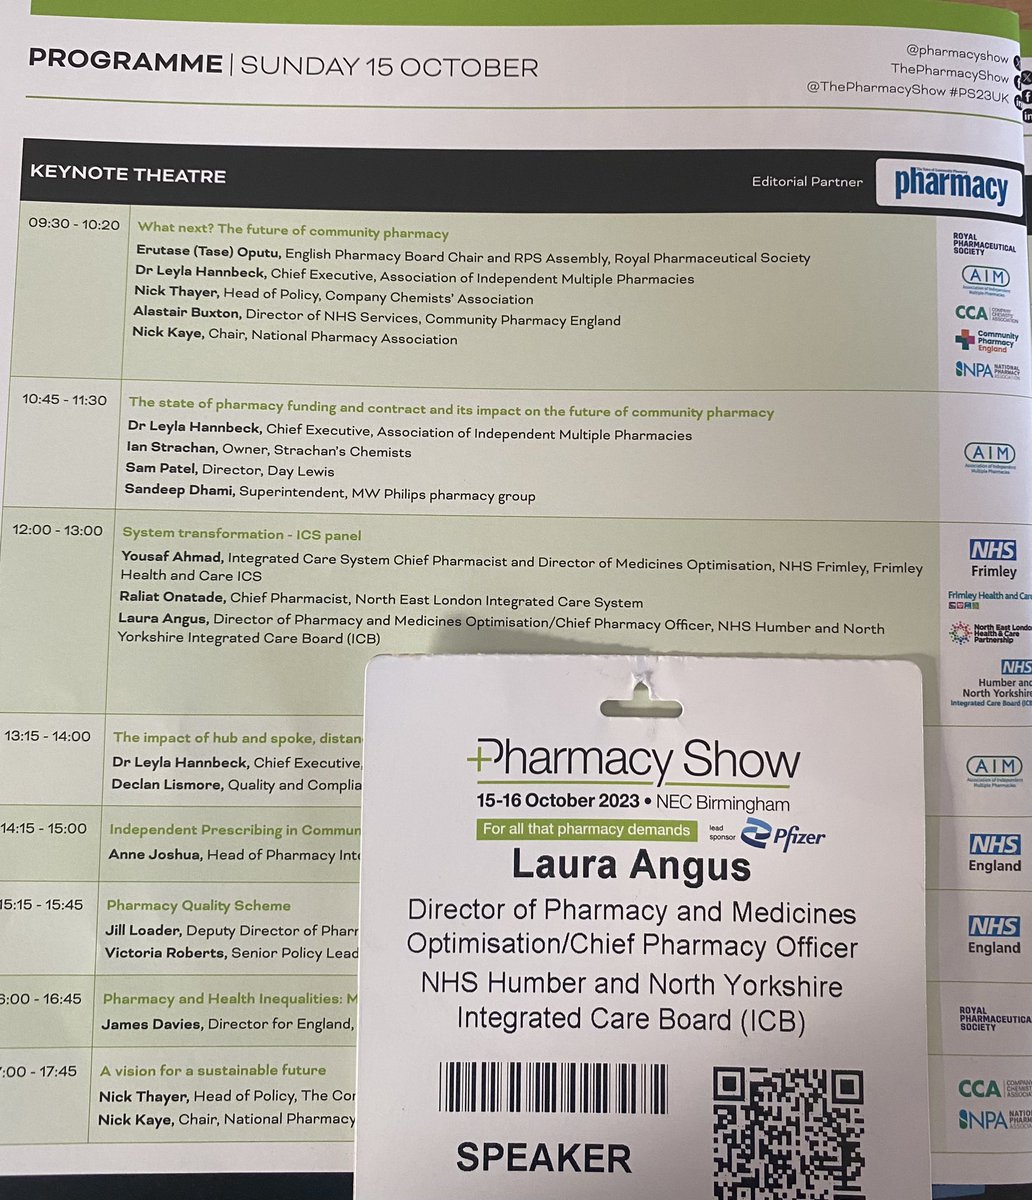 Exciting & thoroughly enjoyable (once I stopped being nervous) to be part of a panel of fellow ICB Chief Pharmacists @M_YousafAhmad & @Ral_sez talking all things #Pharmacy & #SystemTransformation @pharmacyshow #PS23UK @HNYPartnership @FrimleyHC @NHS_NELondon 🙏 @agnes_jacobs